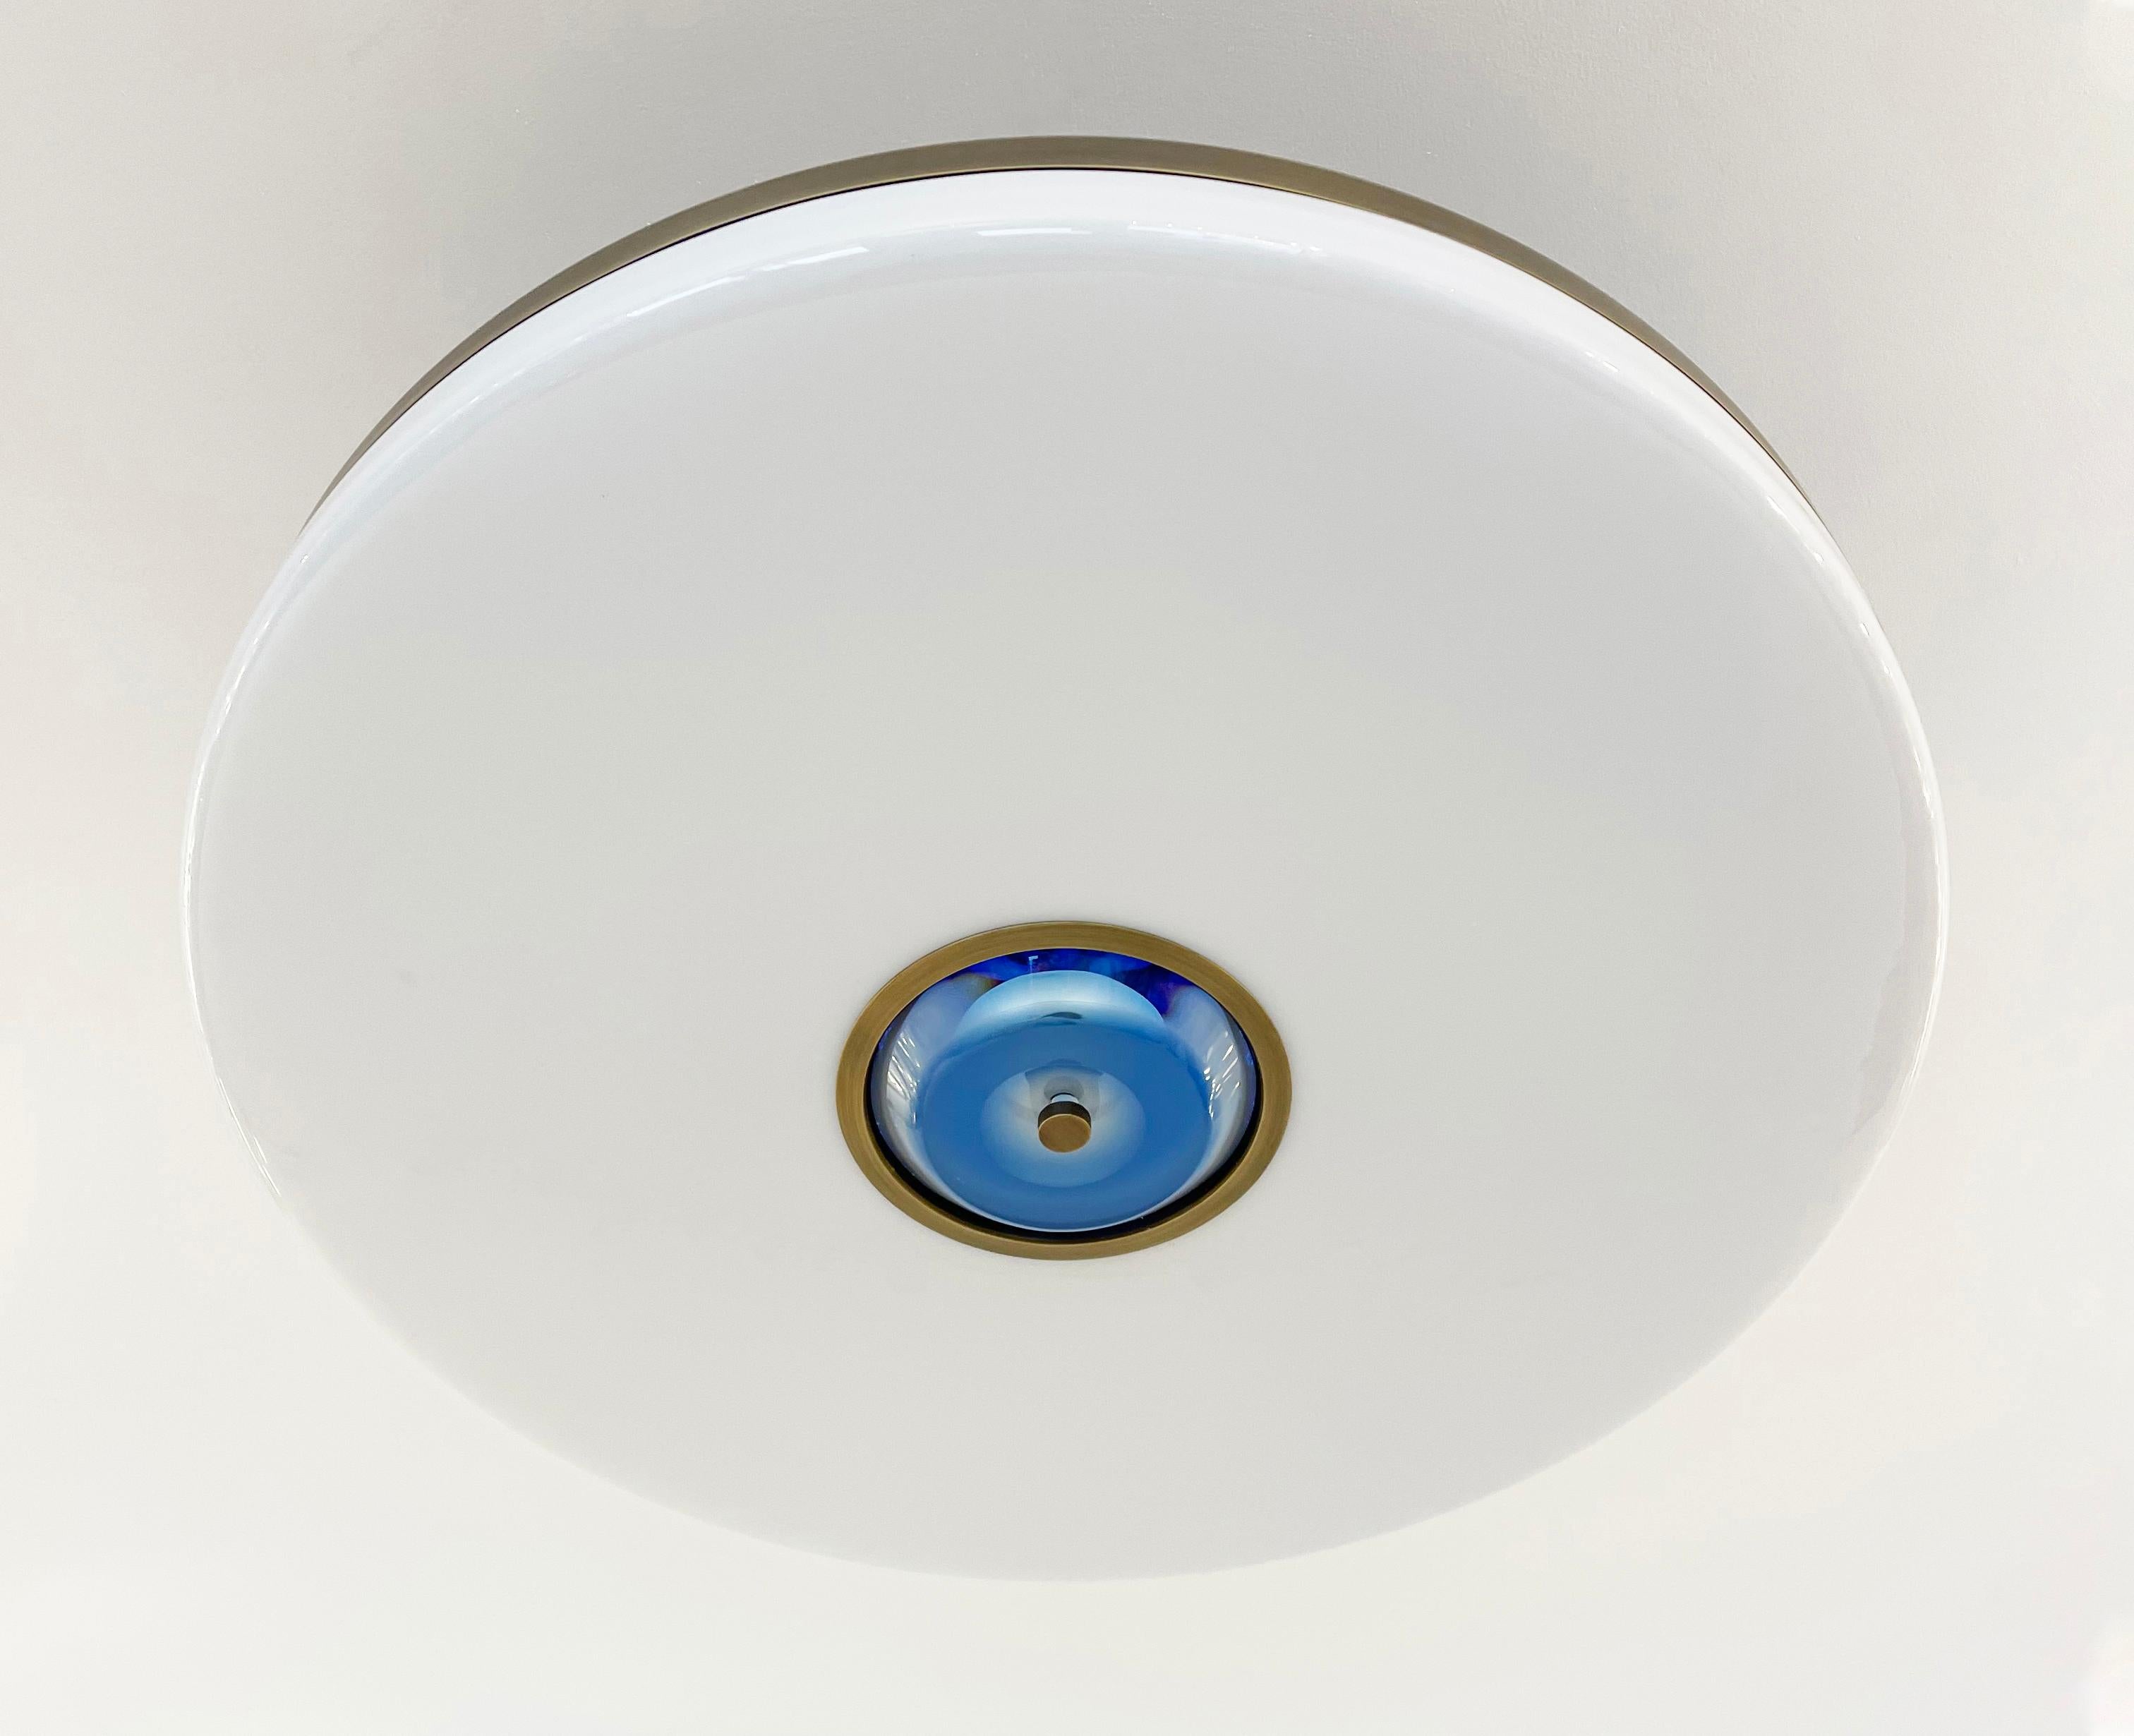 Iris Ceiling Light by Gaspare Asaro-Satin Brass Finish In New Condition For Sale In New York, NY